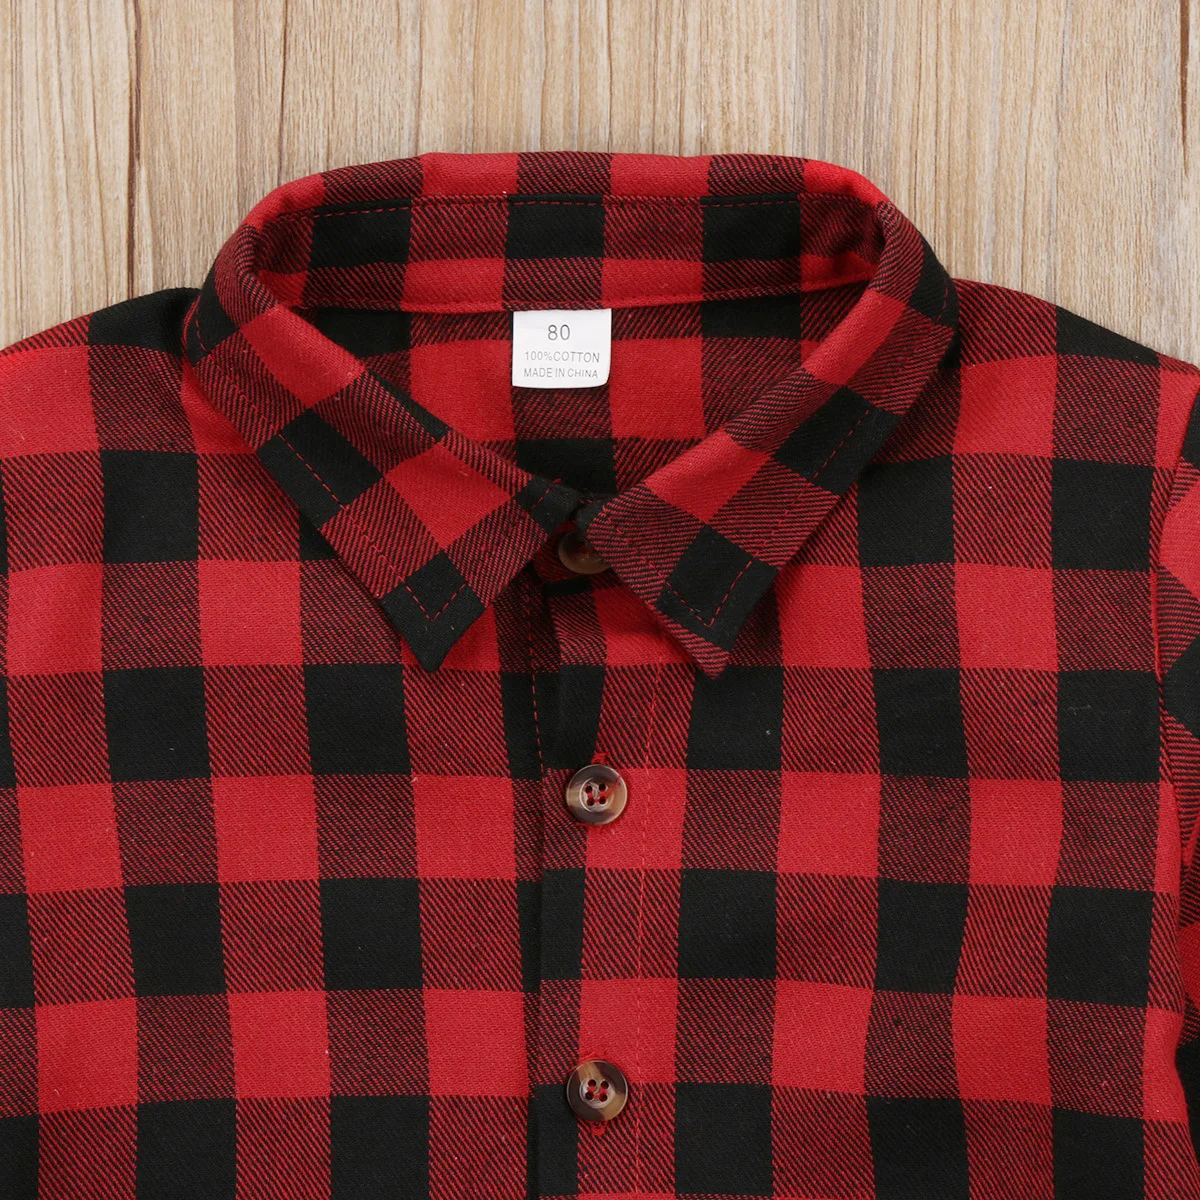 Wiswell Baby Boys Girls Red Plaid Shirts Infant Boy Girl Long Sleeve Pocket Tops